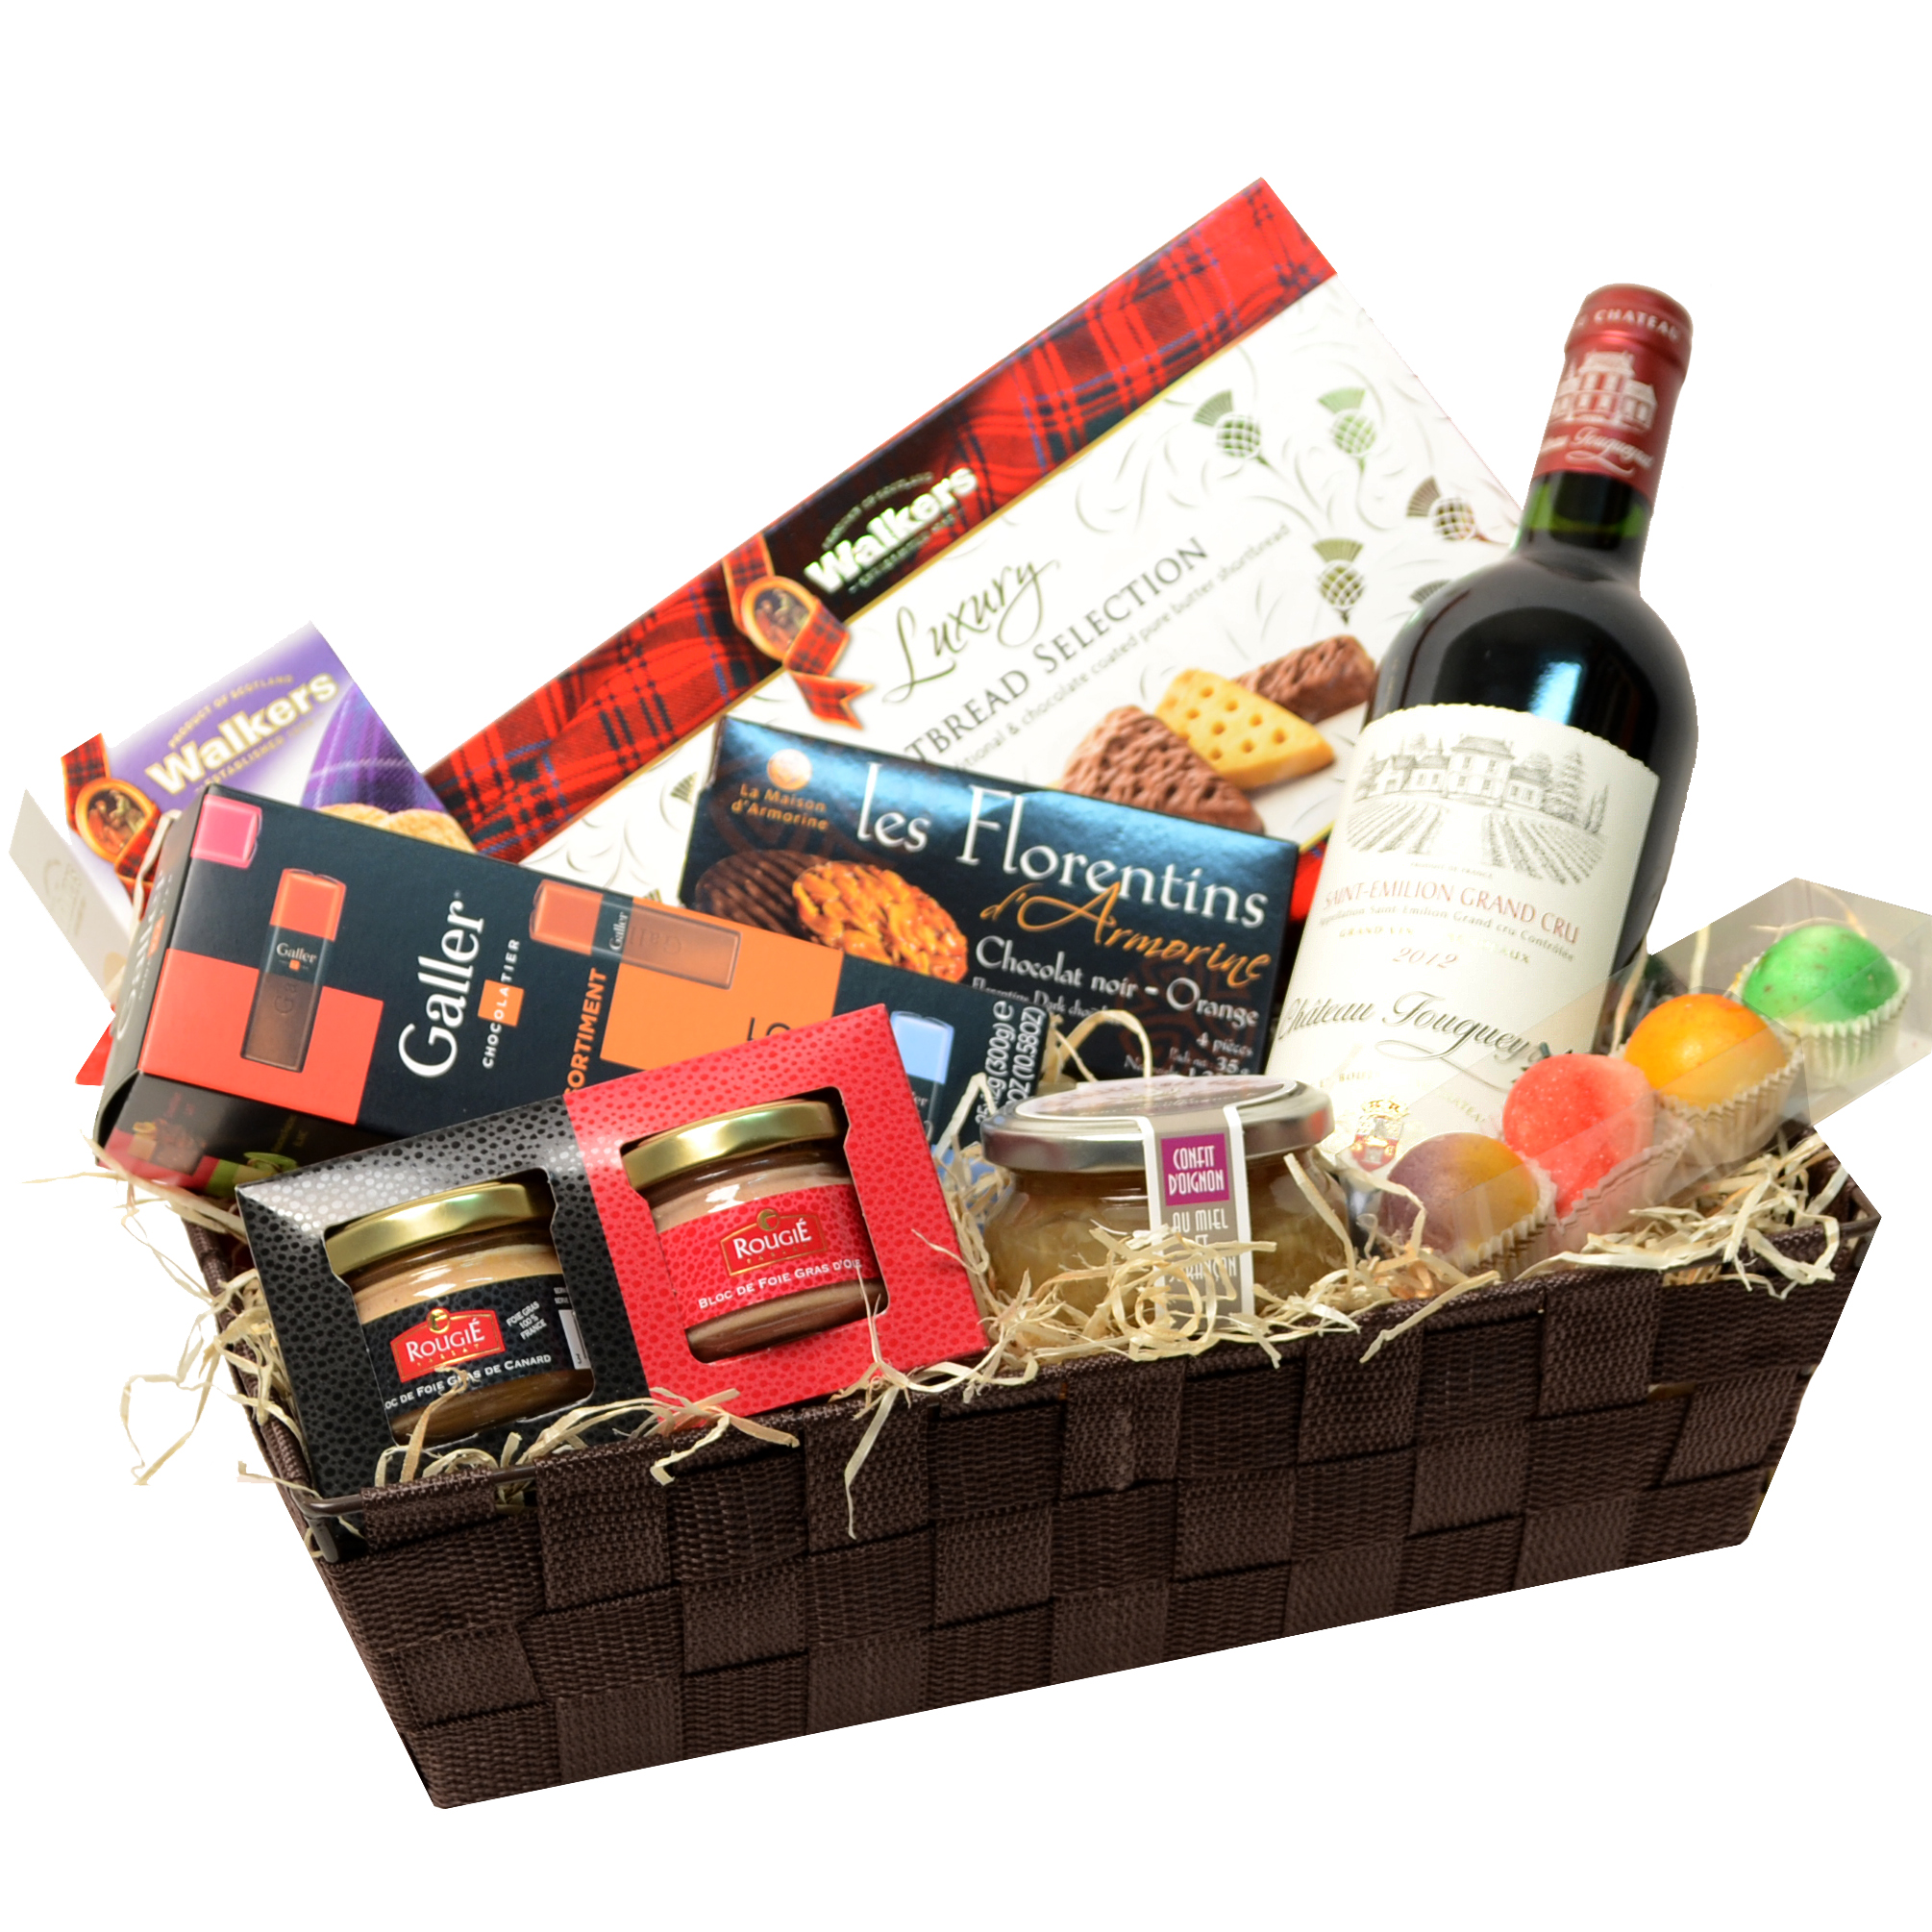 Exclusive Gift Basket with red wine and delicacies